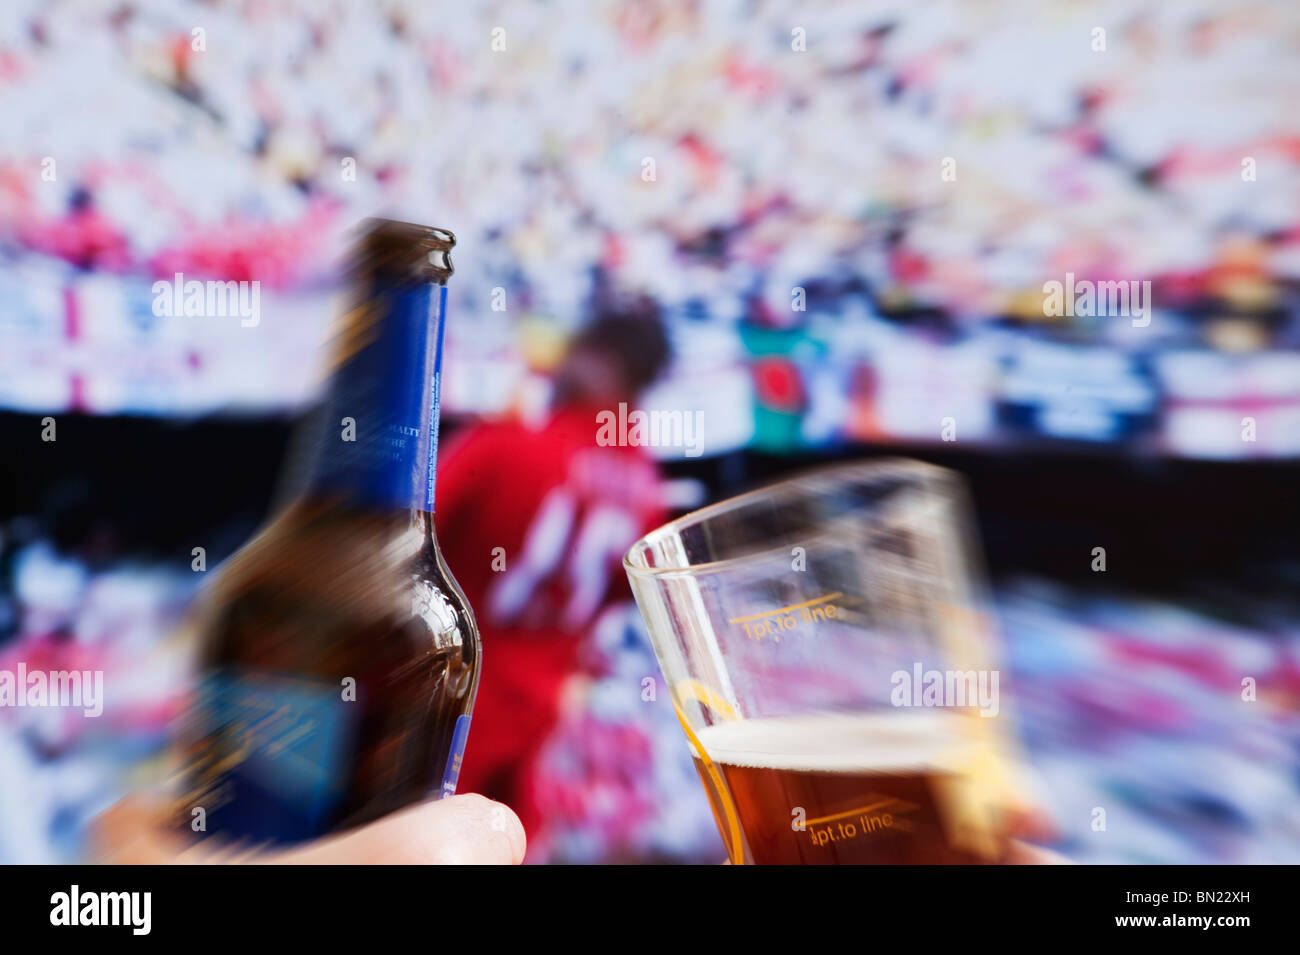 Watching world cup football match on pub tv screen with bottle of beer in foreground Stock Photo